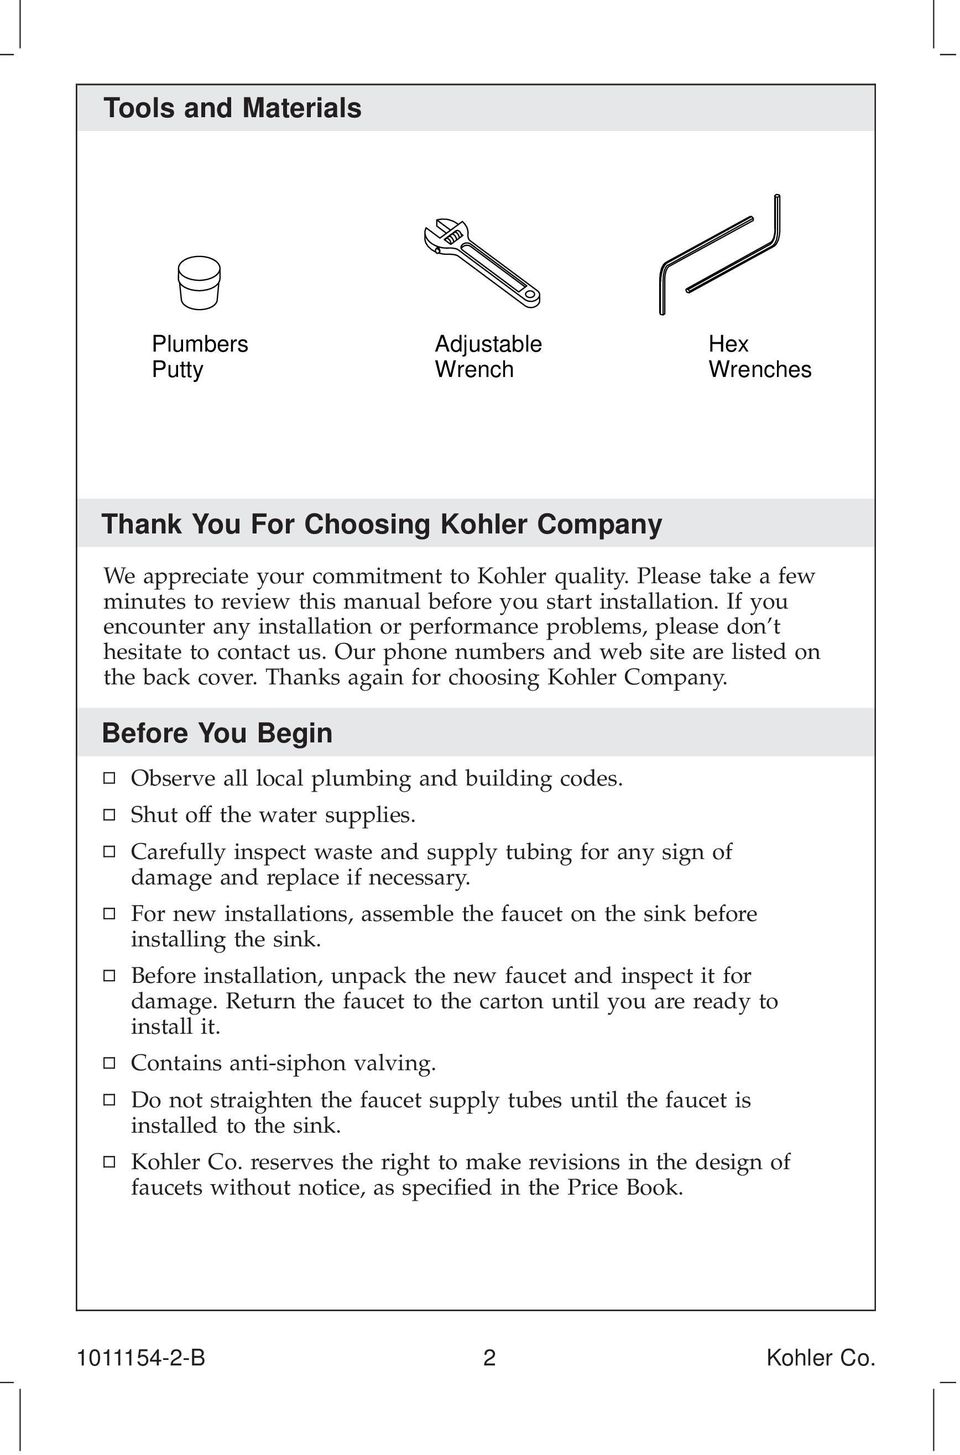 Our phone numbers and web site are listed on the back cover. Thanks again for choosing Kohler Company. Before You Begin Observe all local plumbing and building codes. Shut off the water supplies.